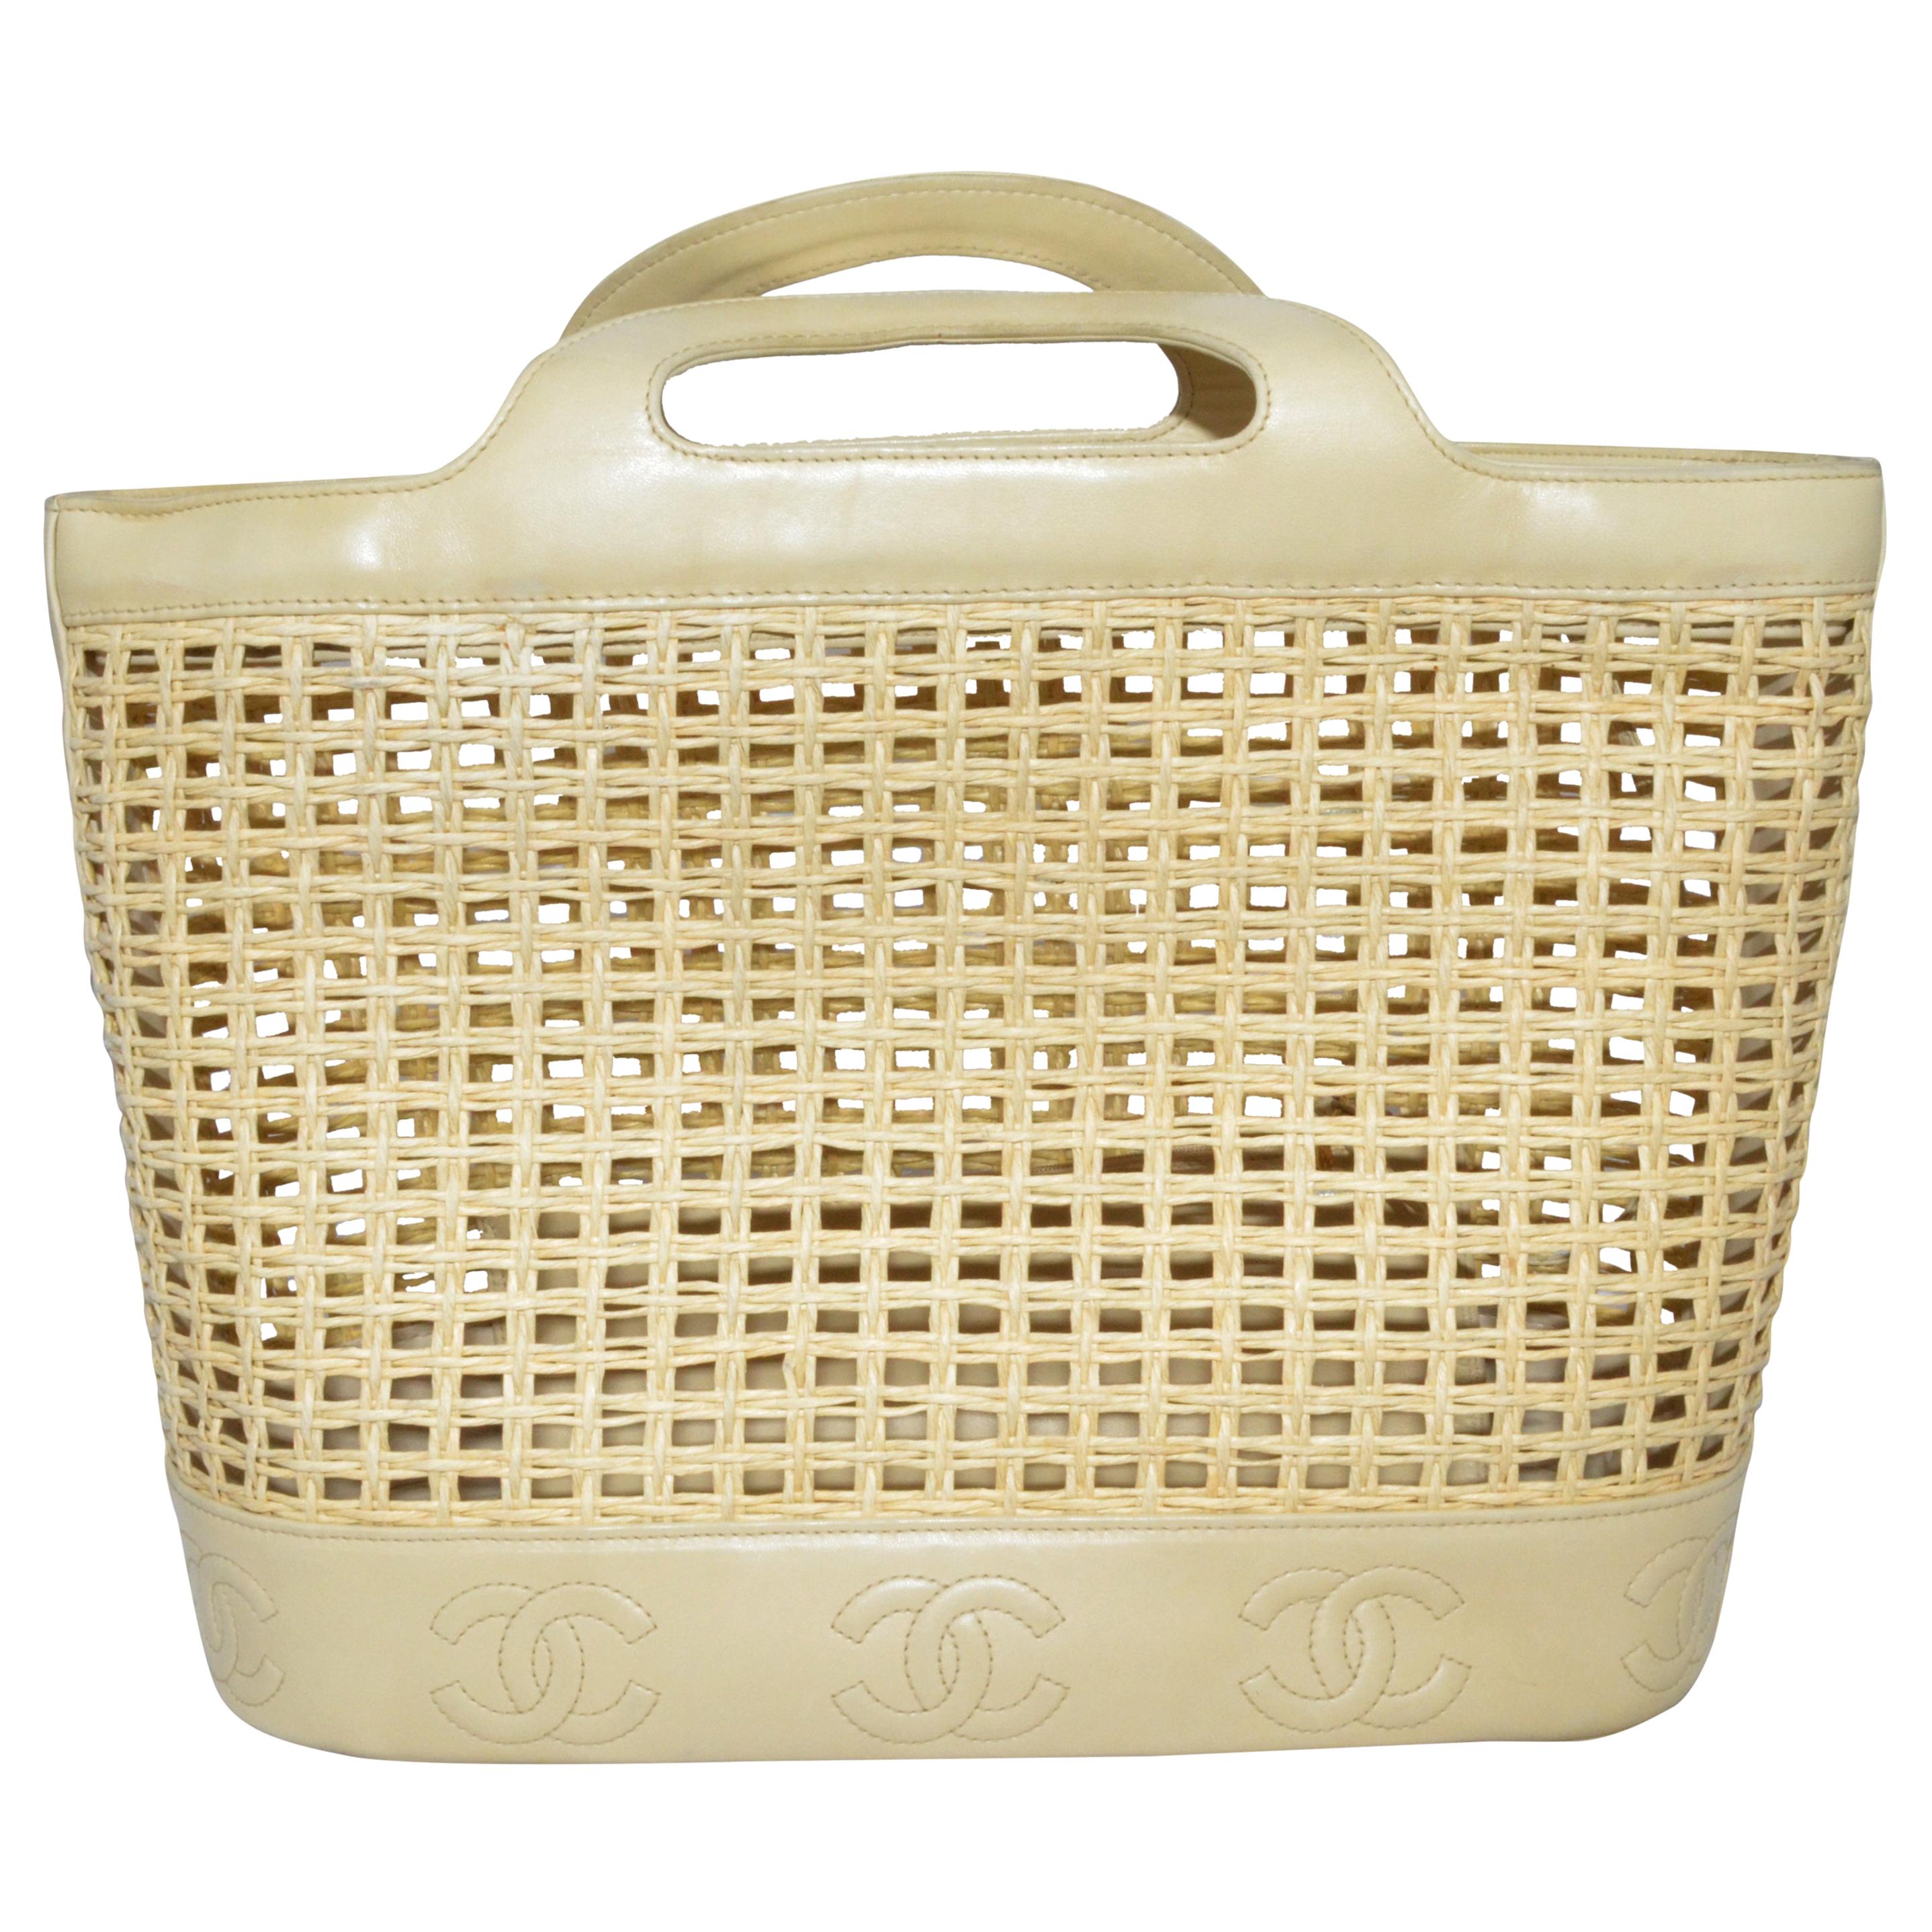 Chanel 1996-97 Vintage Beige Leather Woven Tote Bag